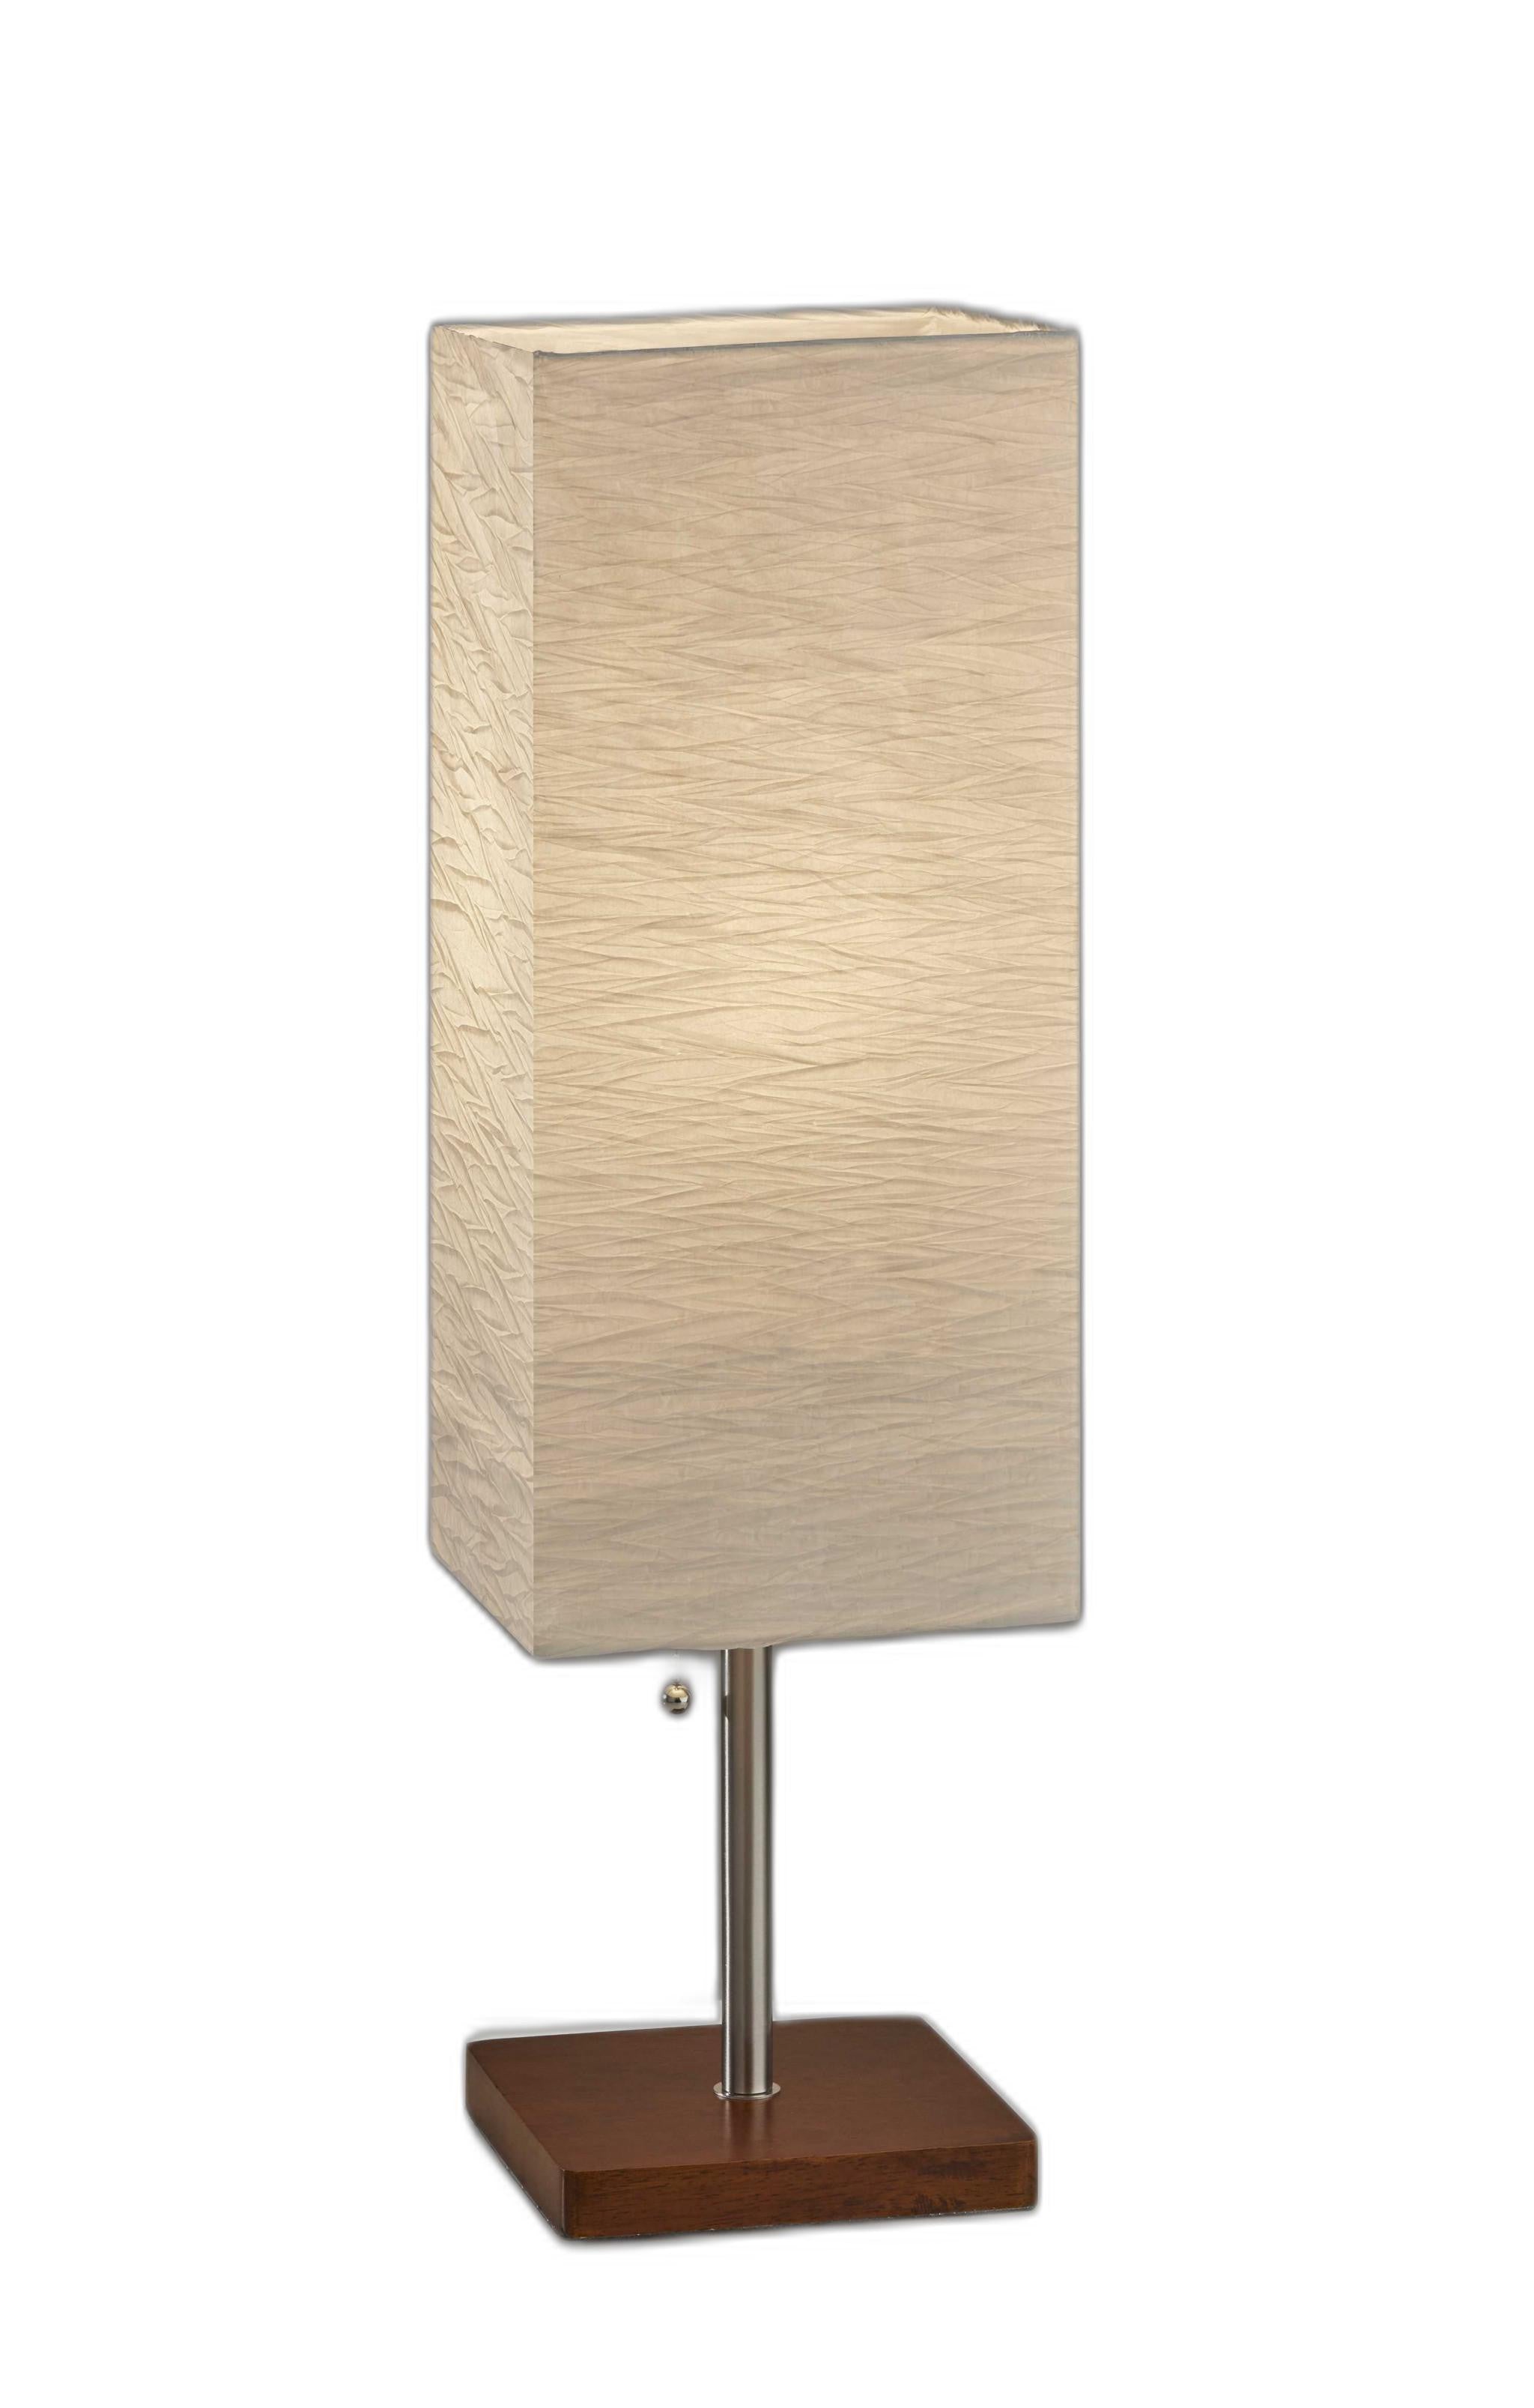 Wildside Paper Shade With Natural Wood Table Lamp